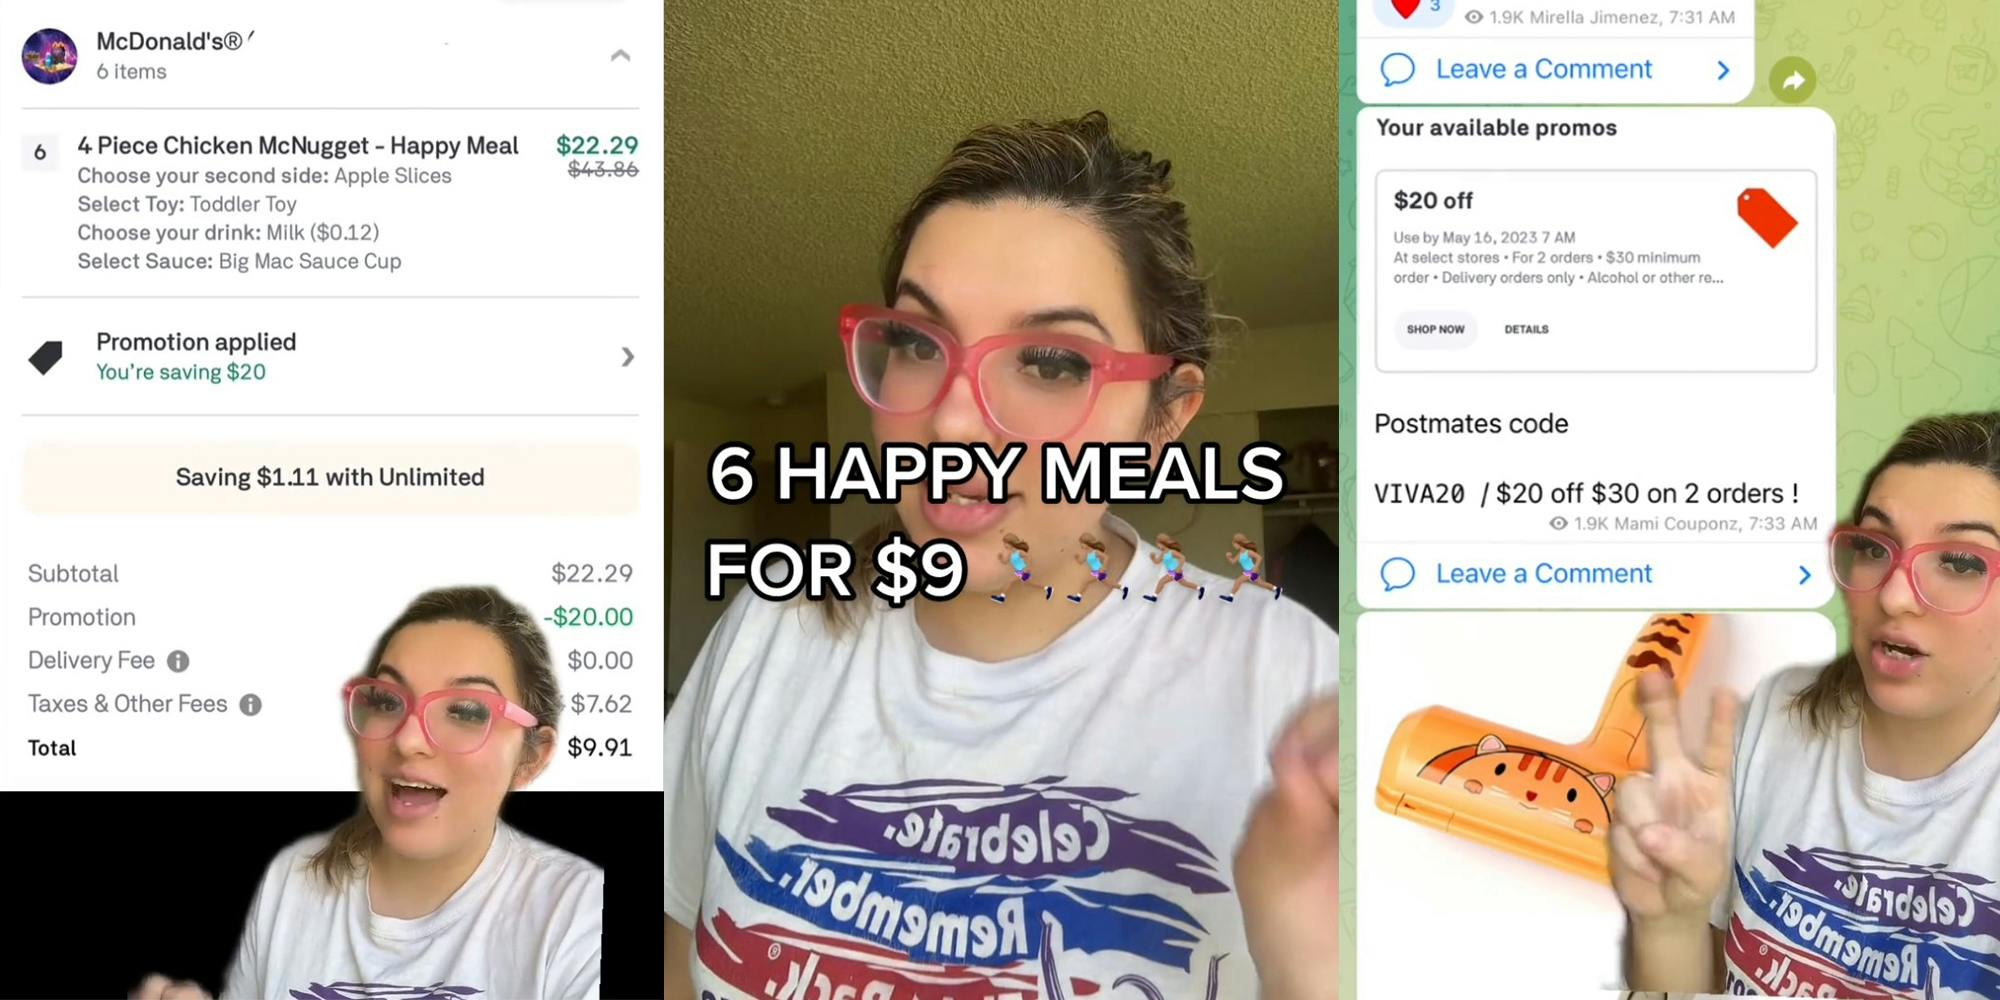 McDonald’s app customer shows how to get 6 Happy Meals for $9